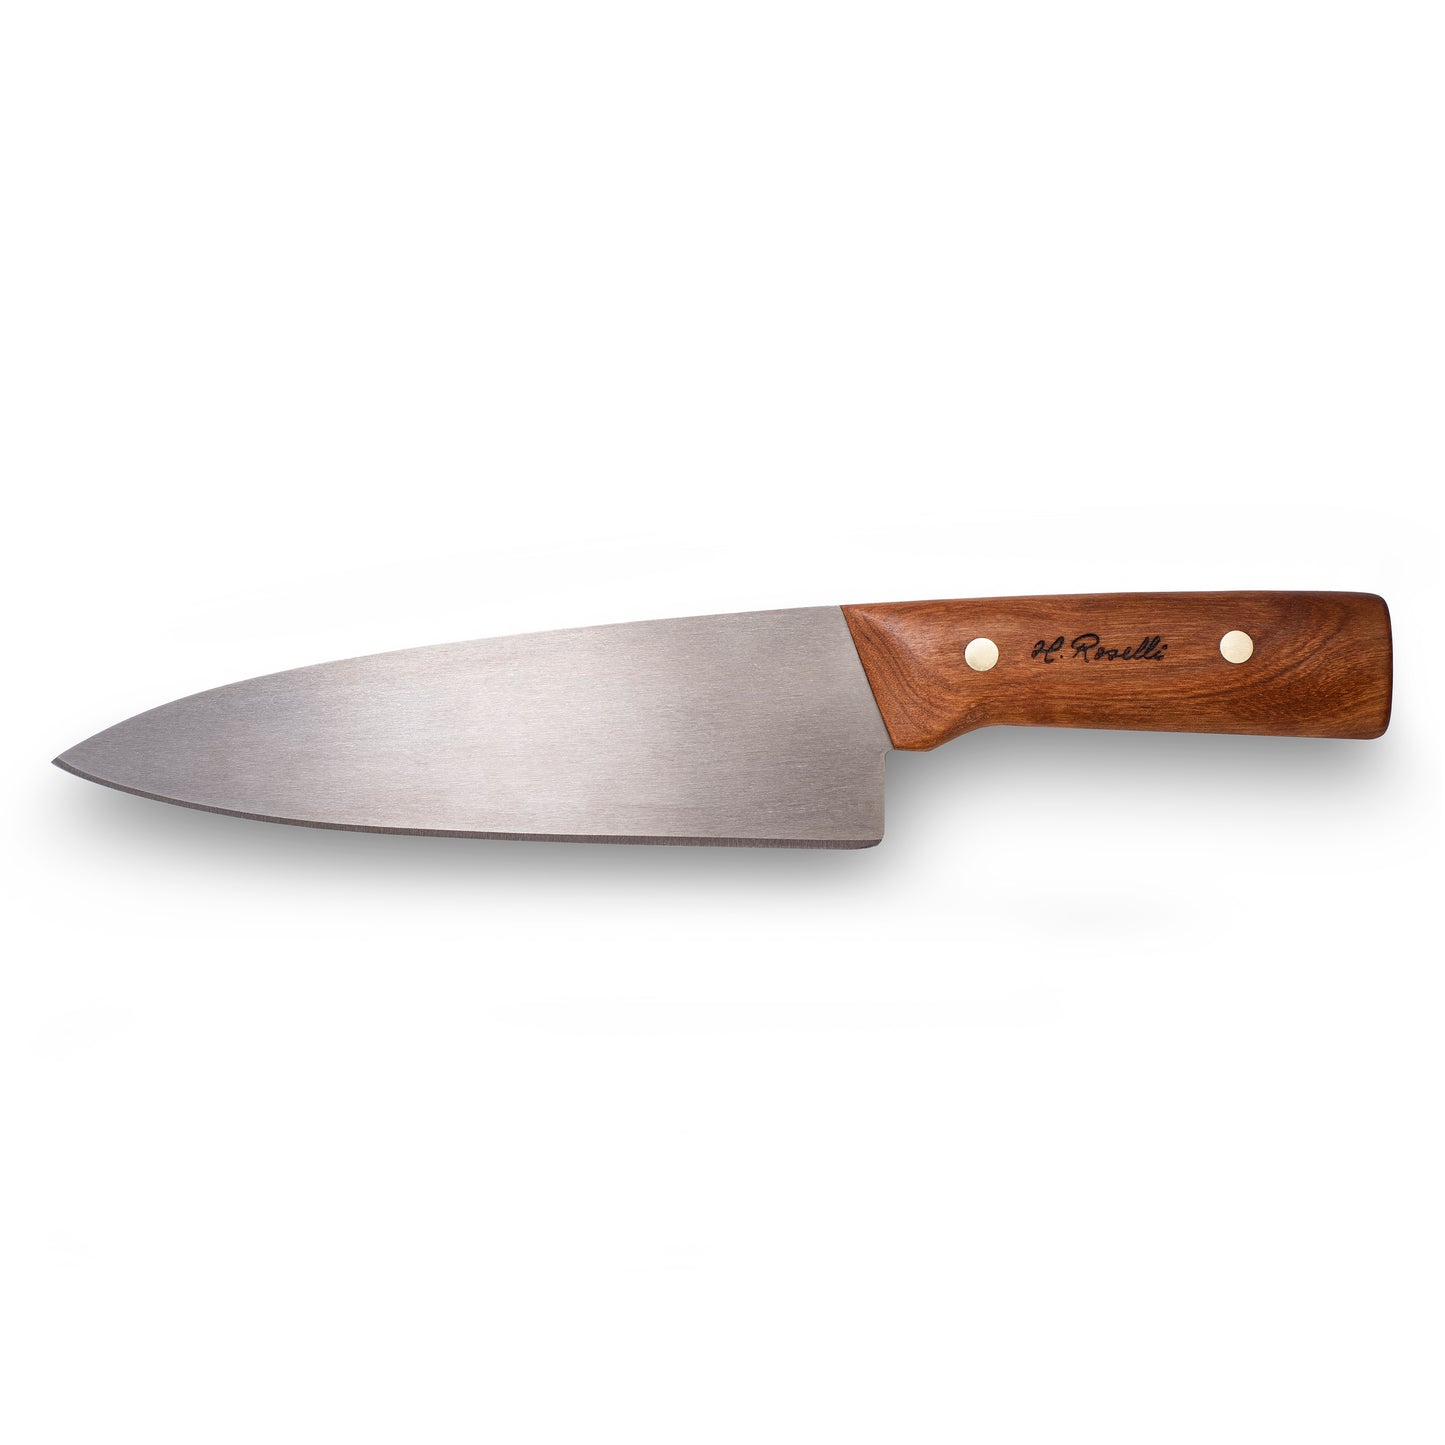 Roselli UHC Cook's Knife Culinary Tool Kitchen Knife